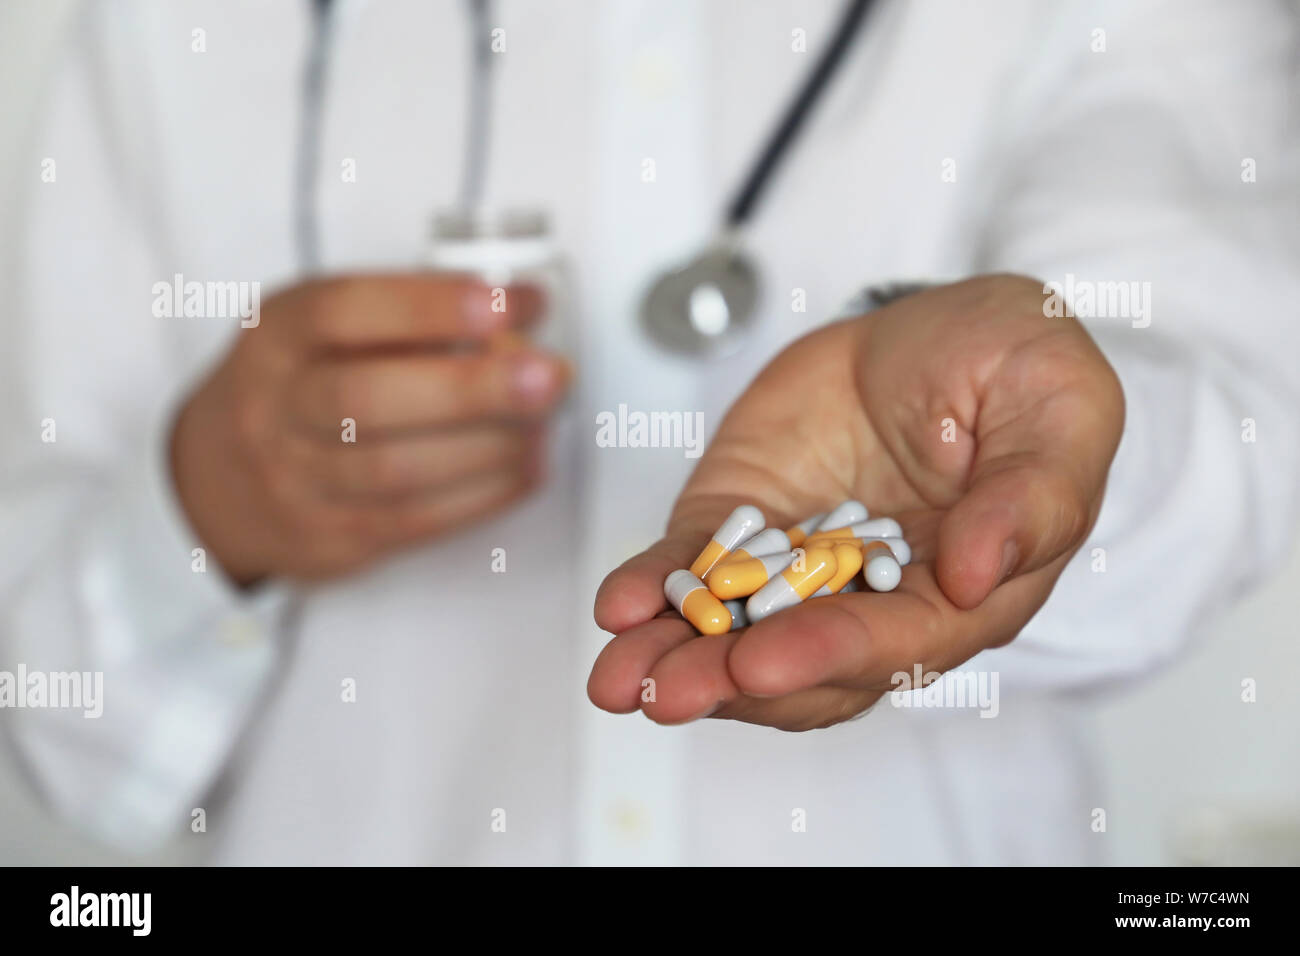 Doctor giving pills, physician holding in palm of hand medication in capsules. Concept of dose of drugs, vitamins, medical exam, pharmacy, flu Stock Photo